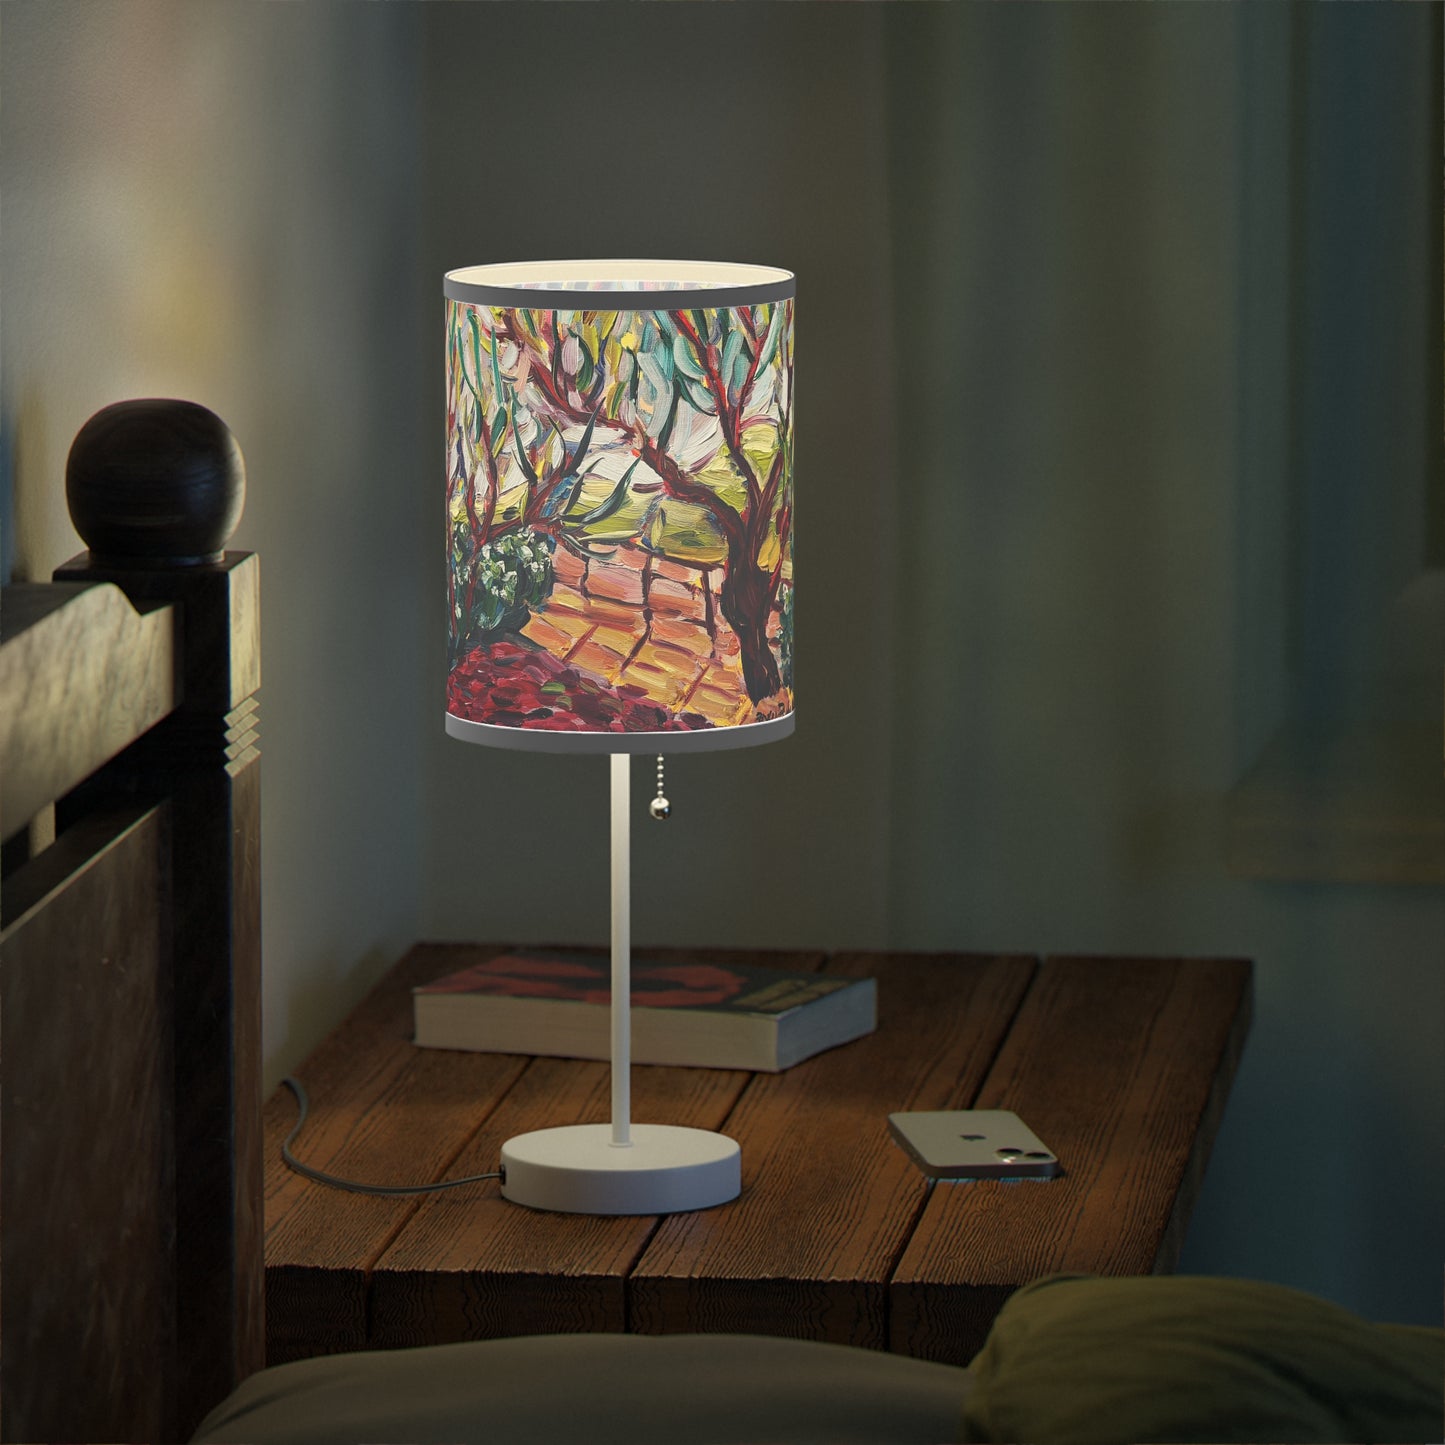 Breezy Trees Lamp on a Stand, US|CA plug